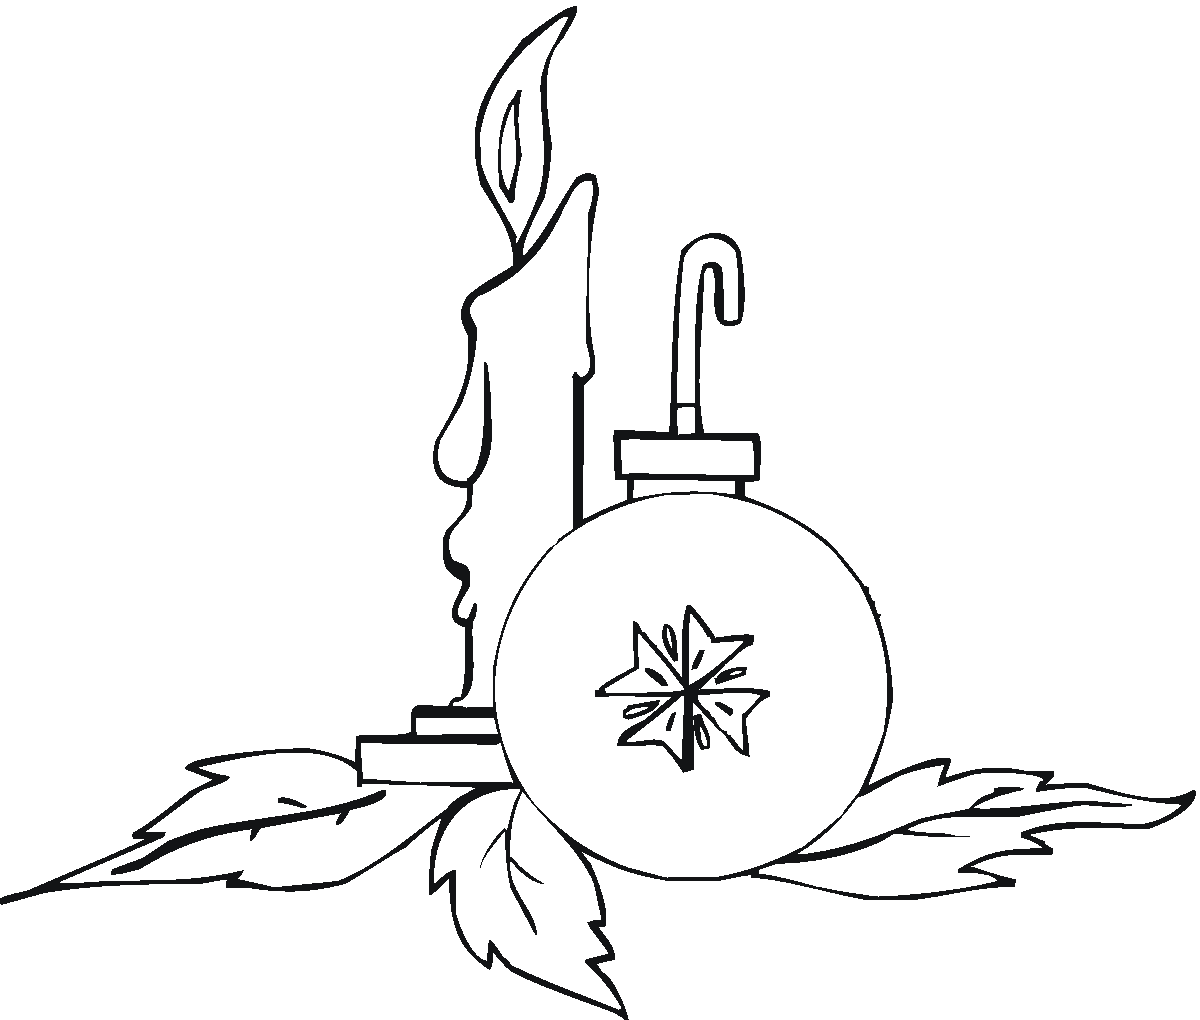 Christmas Ornaments Coloring Pages, Christmas Ornament Coloring Sheets